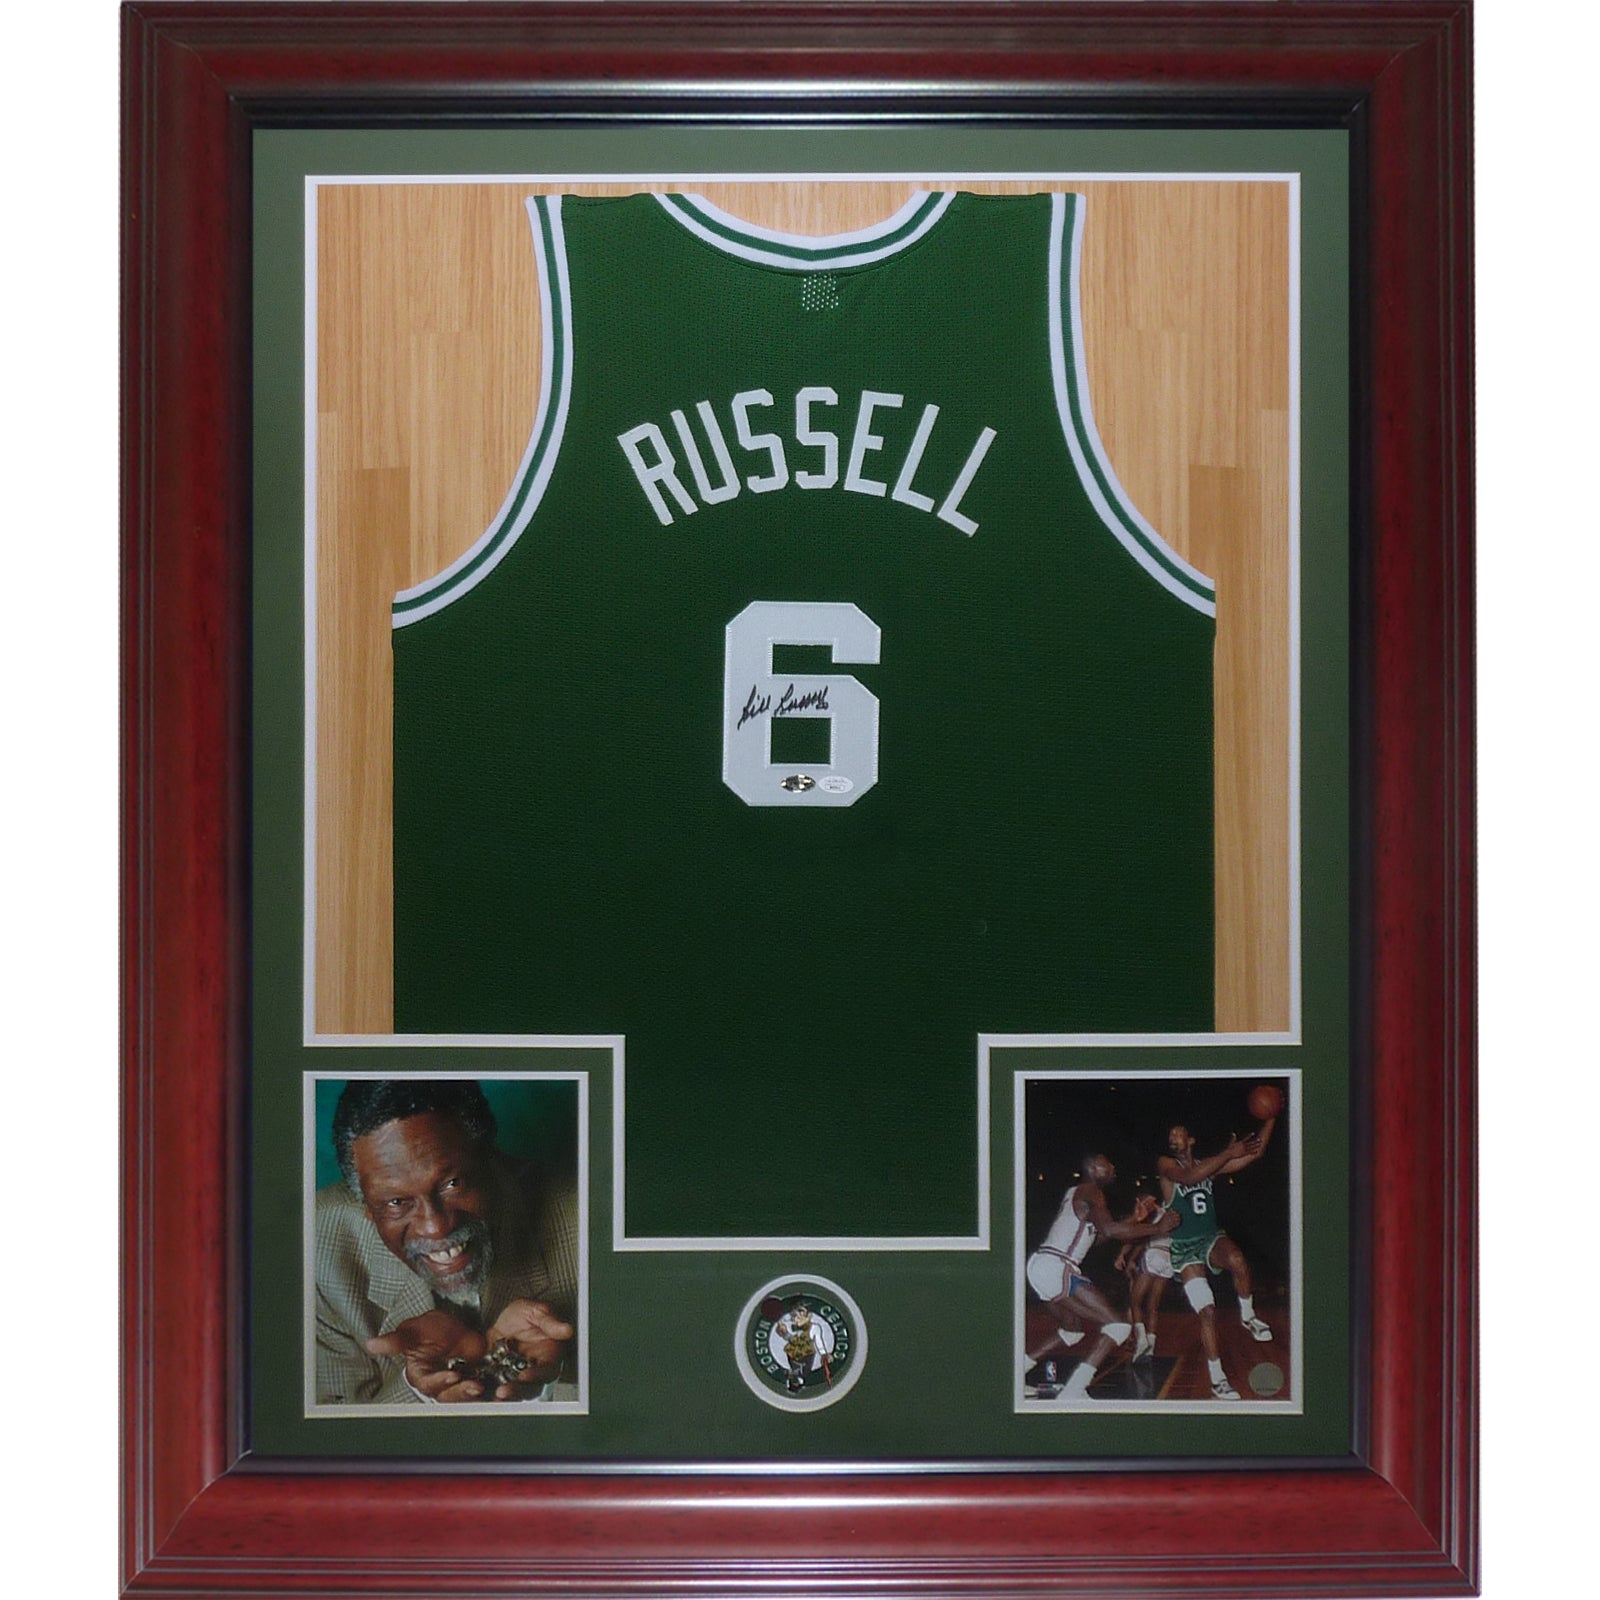 bill russell jersey for sale